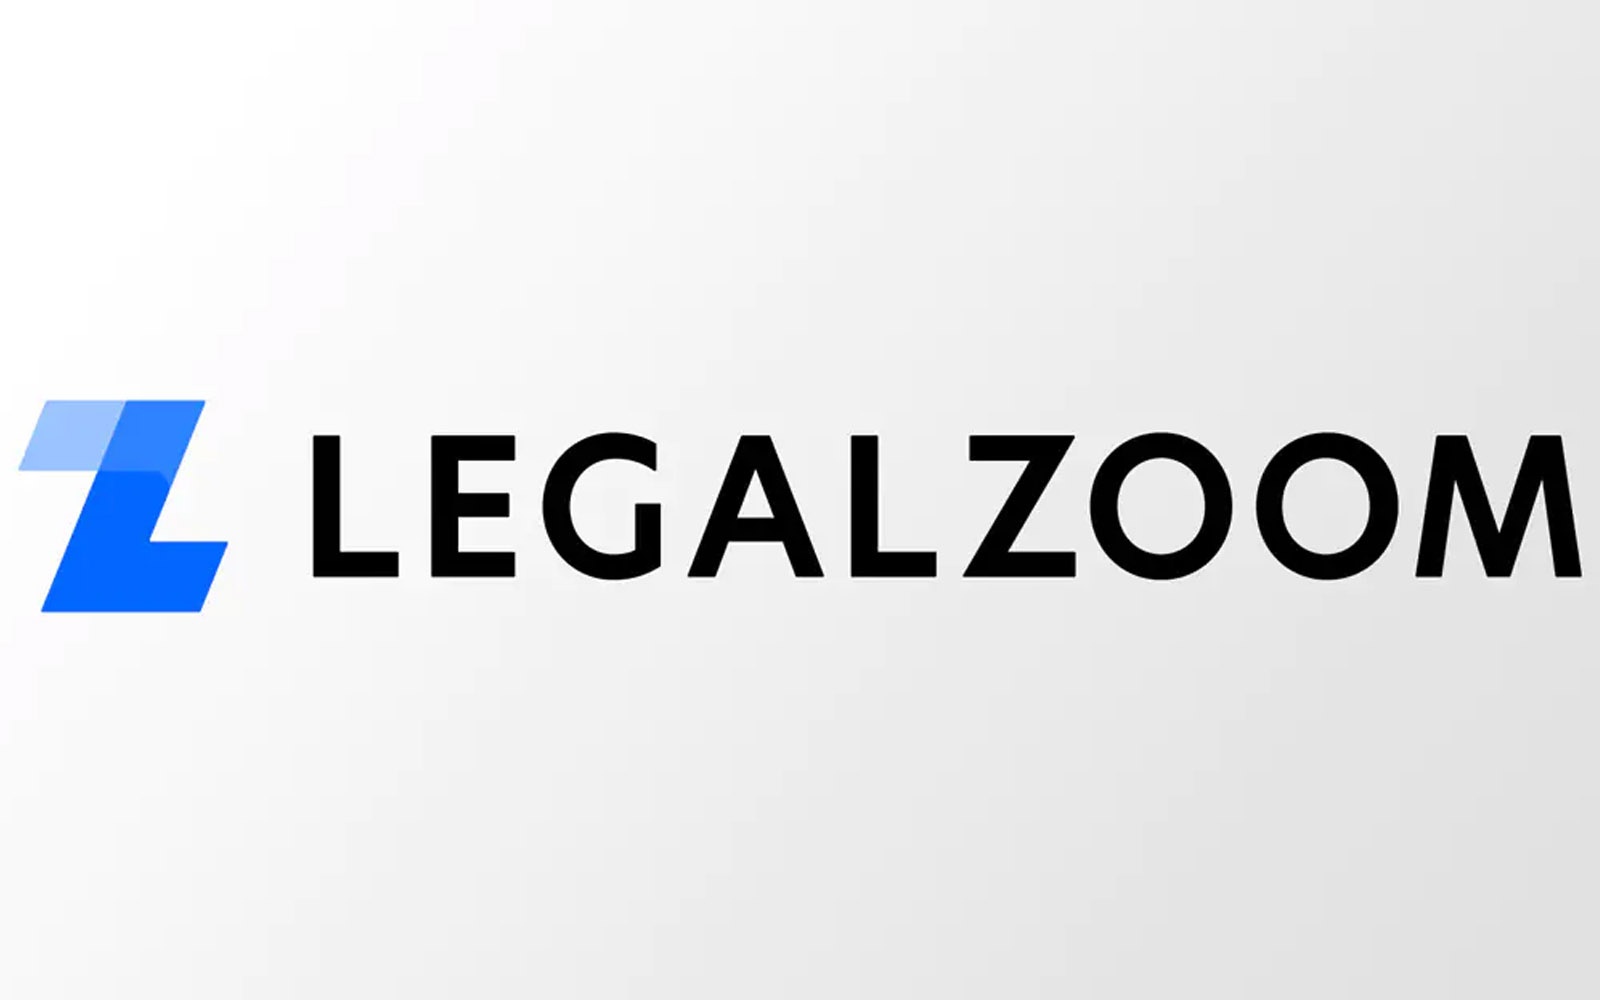 OMD Named LegalZoom’s New Media Agency of Record